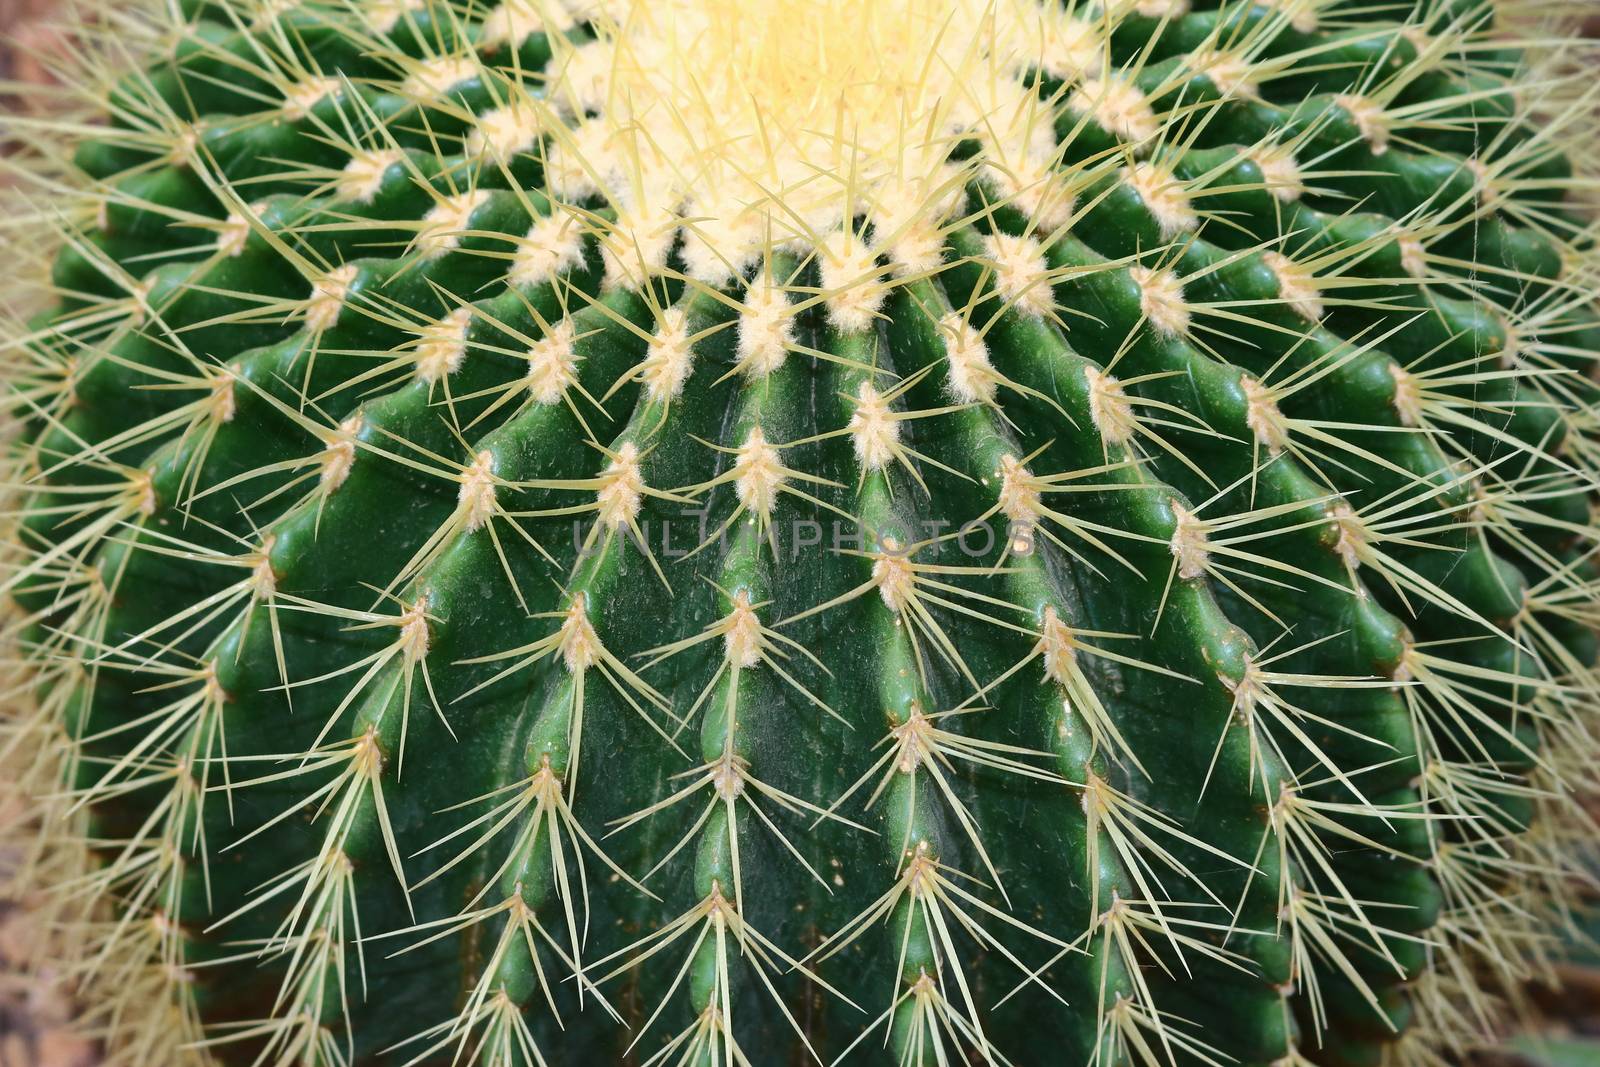 Cactus Plant by robertboss